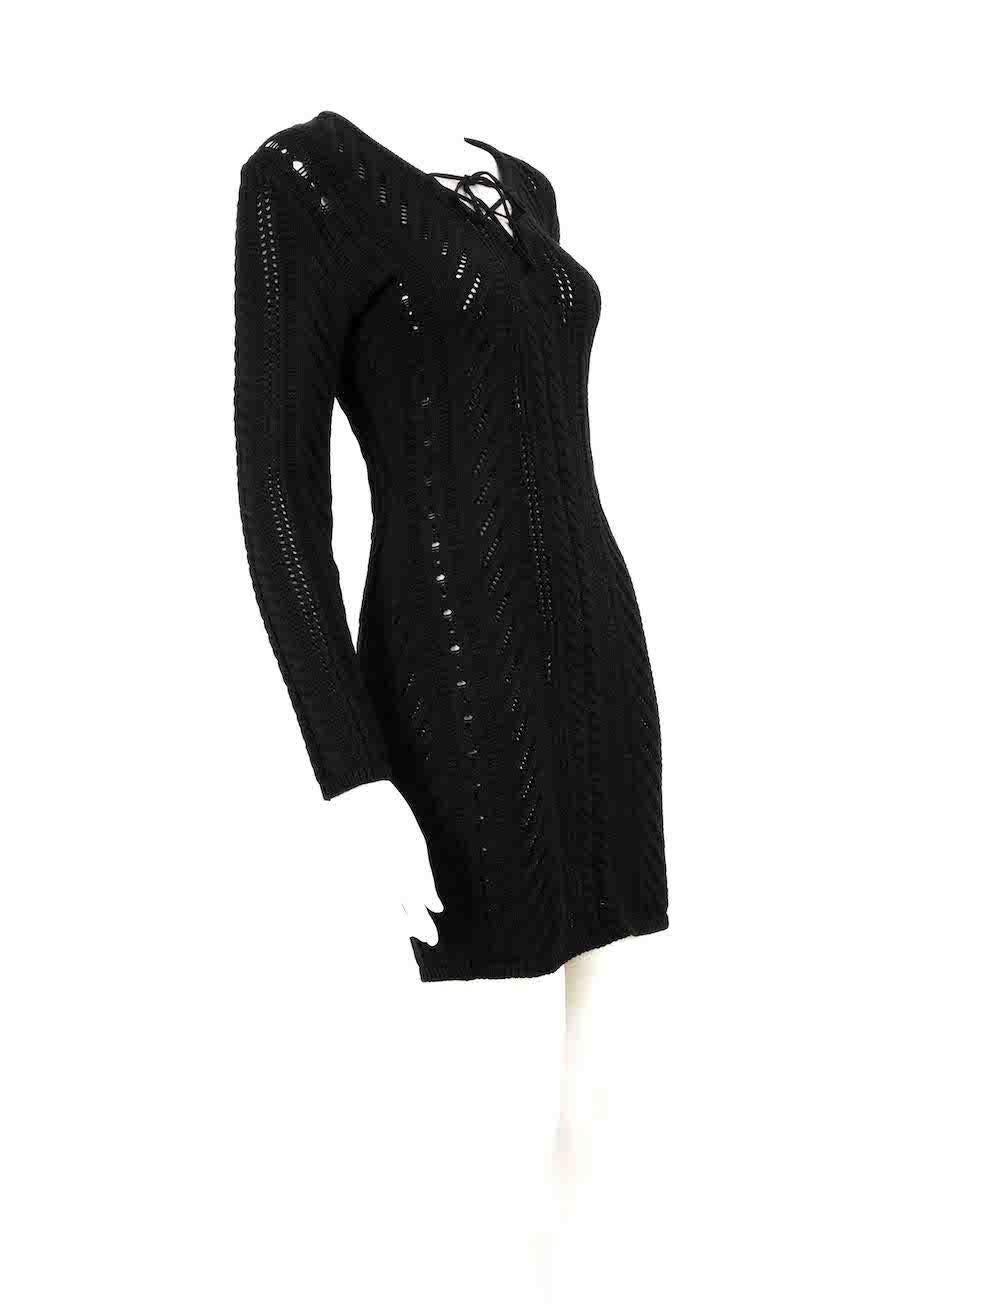 CONDITION is Very good. Minimal wear to dress is evident. Minimal wear to care label, which has been cut out on this used Dsquared2 designer resale item.
 
 
 
 Details
 
 
 Black
 
 Cotton
 
 Knit dress
 
 Long sleeves
 
 Mini
 
 Lace up front